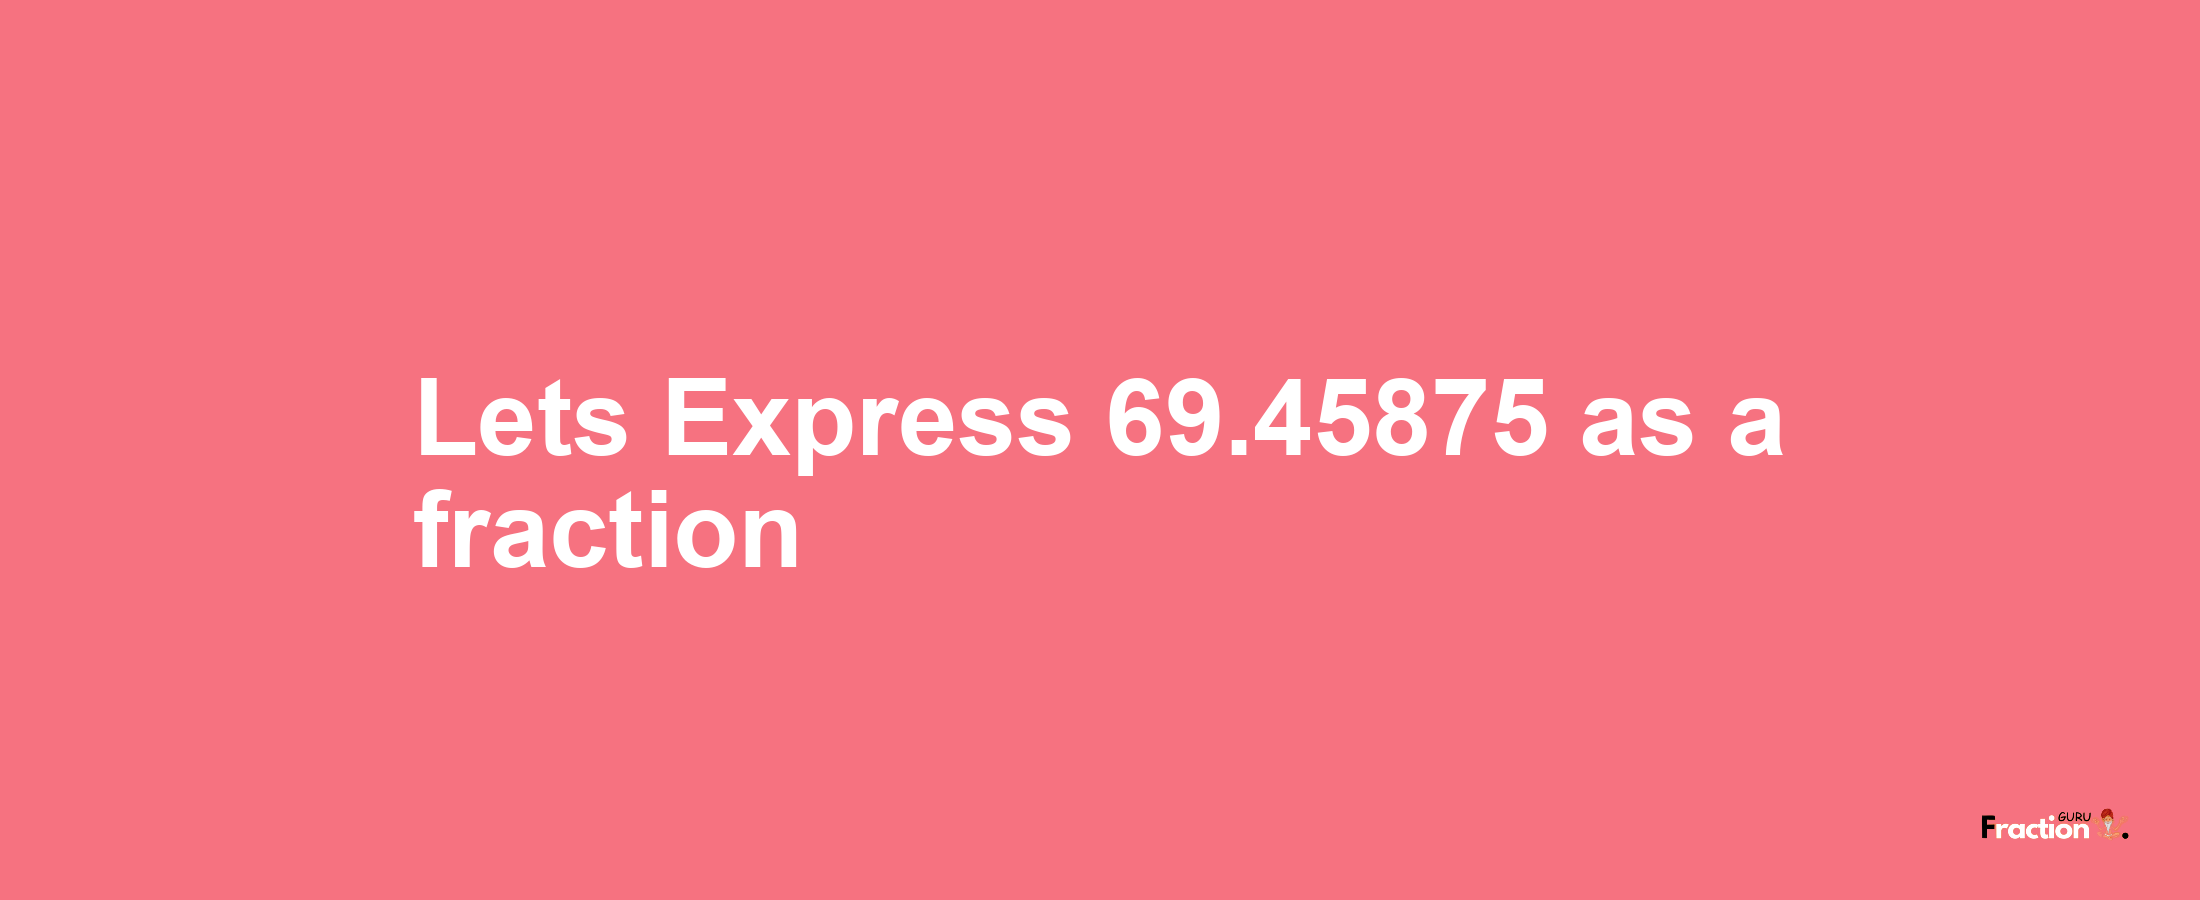 Lets Express 69.45875 as afraction